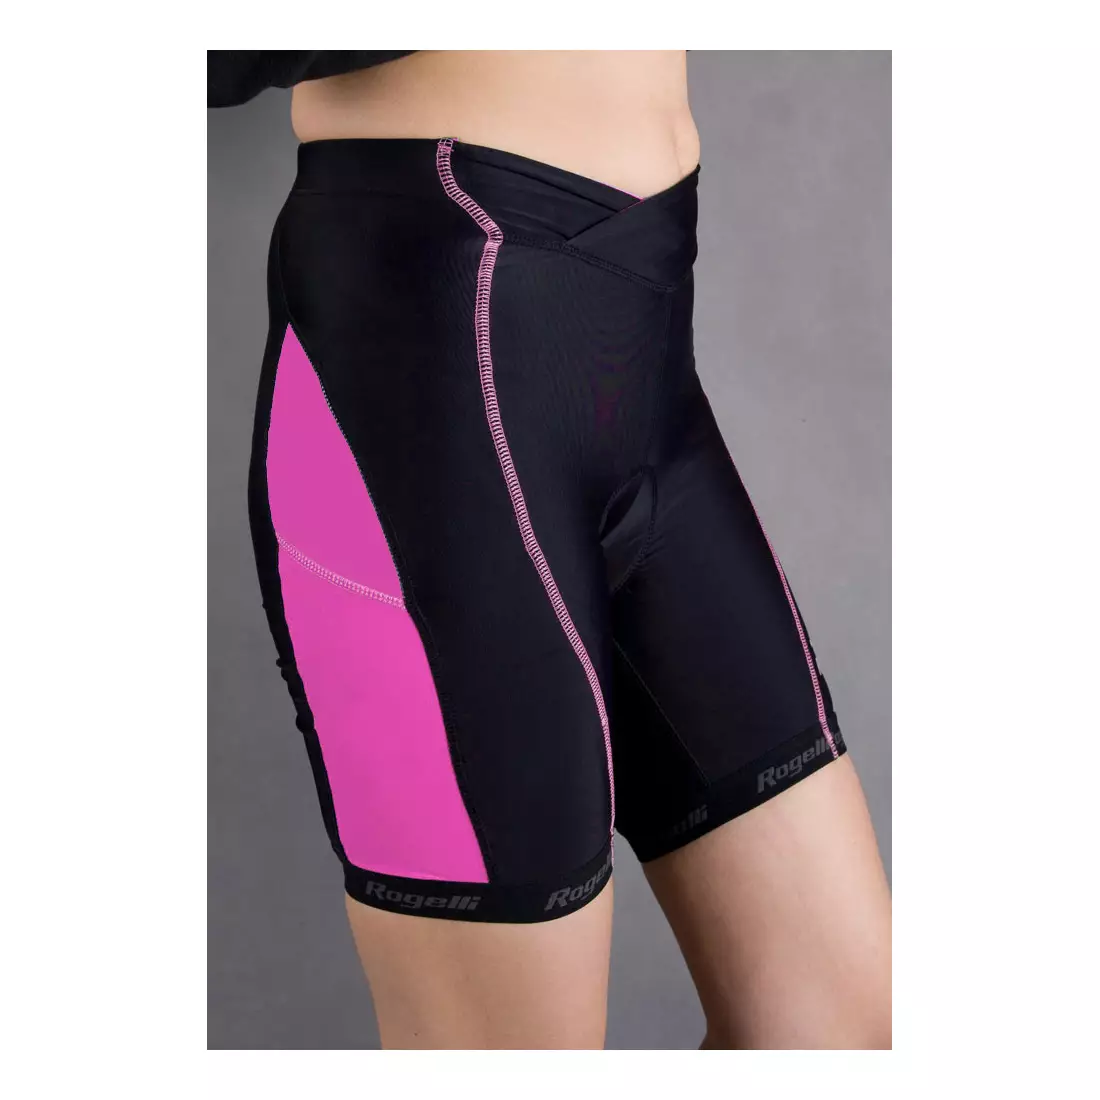 ROGELLI BYLA - women's cycling shorts, color: black and pink